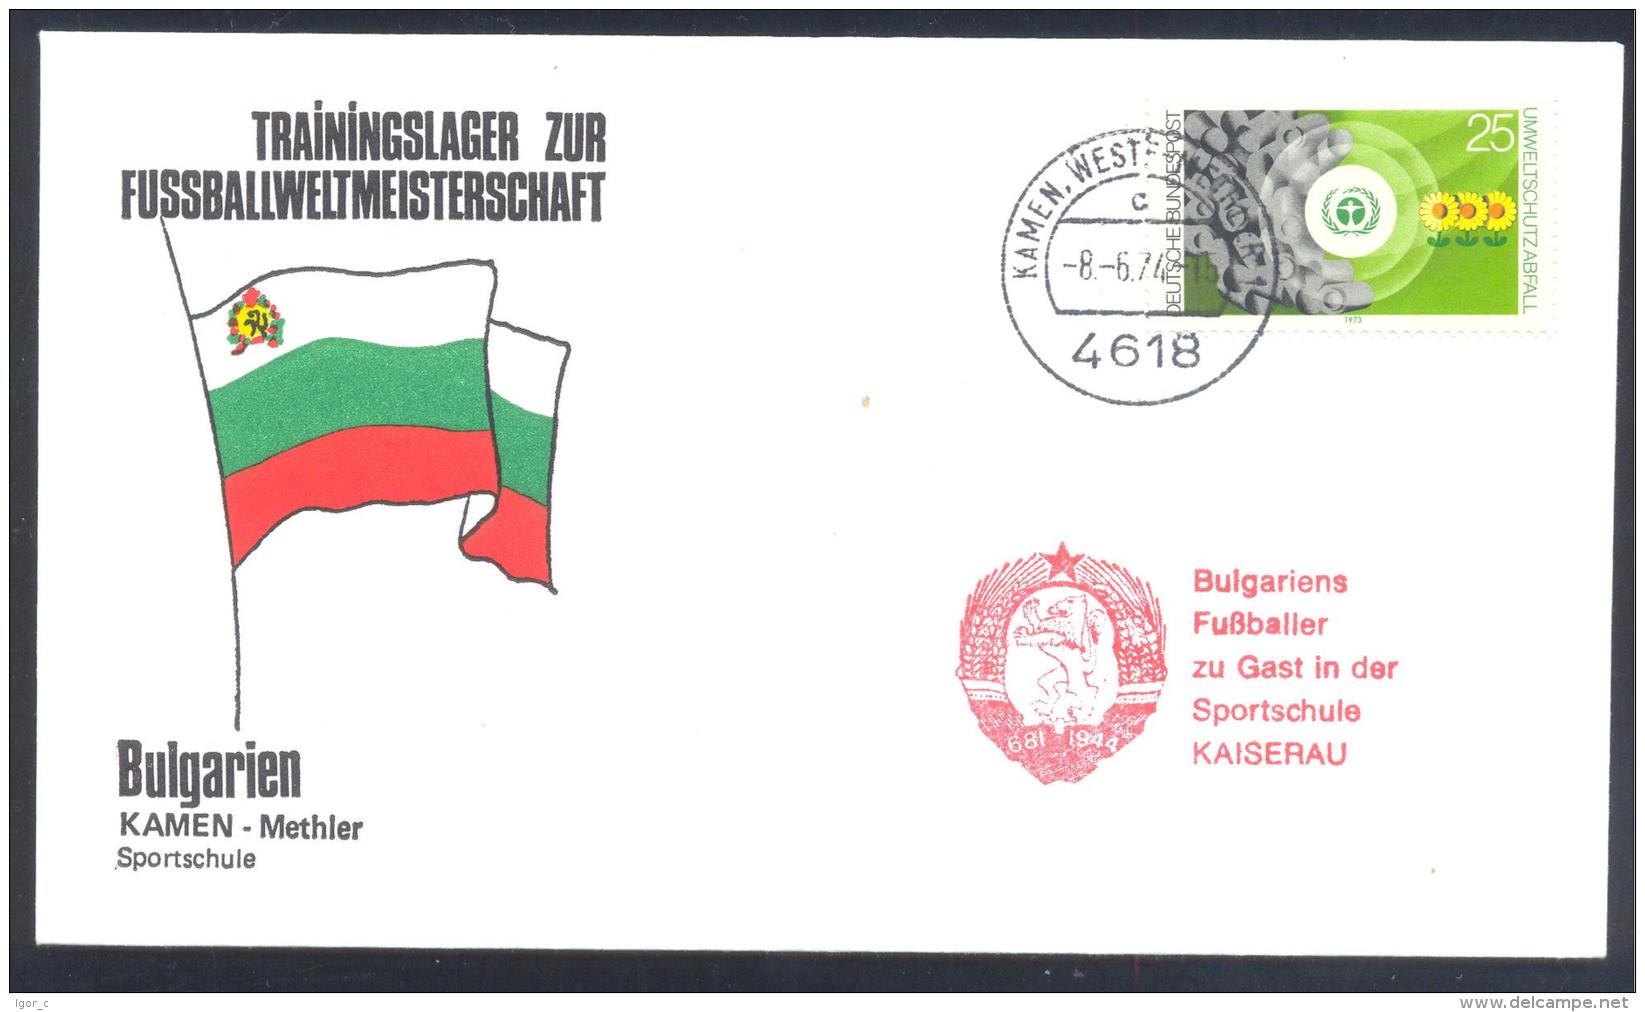 Germany 1974 Cover; Football Soccer Fussball Cacio; FiFA WC Weltmeisterschaft Trainings Camp Bulgaria Lion Lowe - 1974 – Germania Ovest